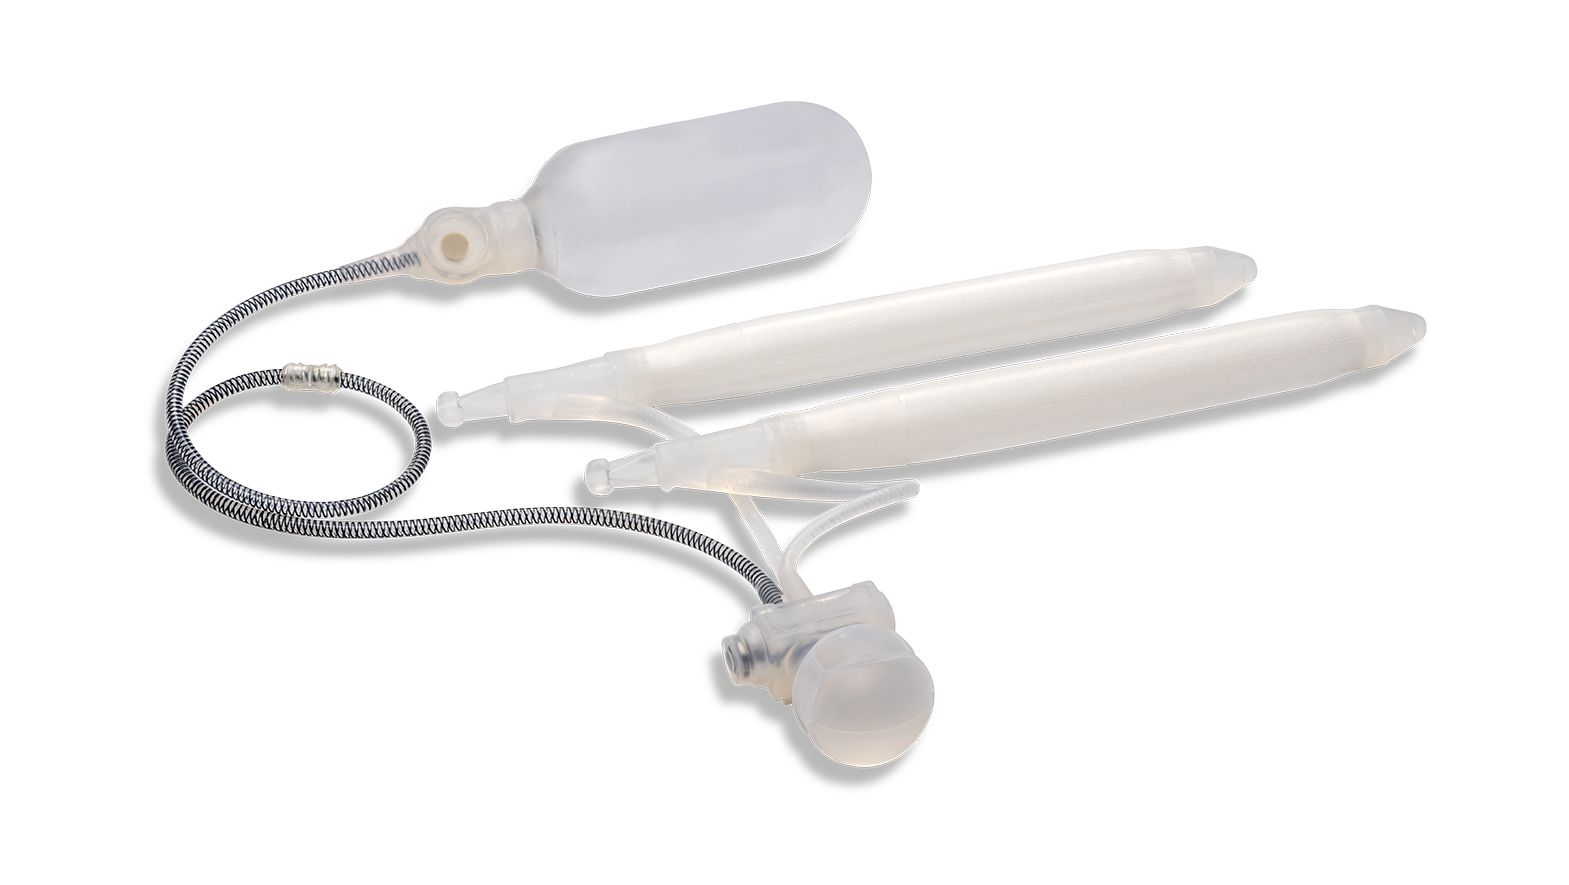 Inflatable Penile Prosthesis